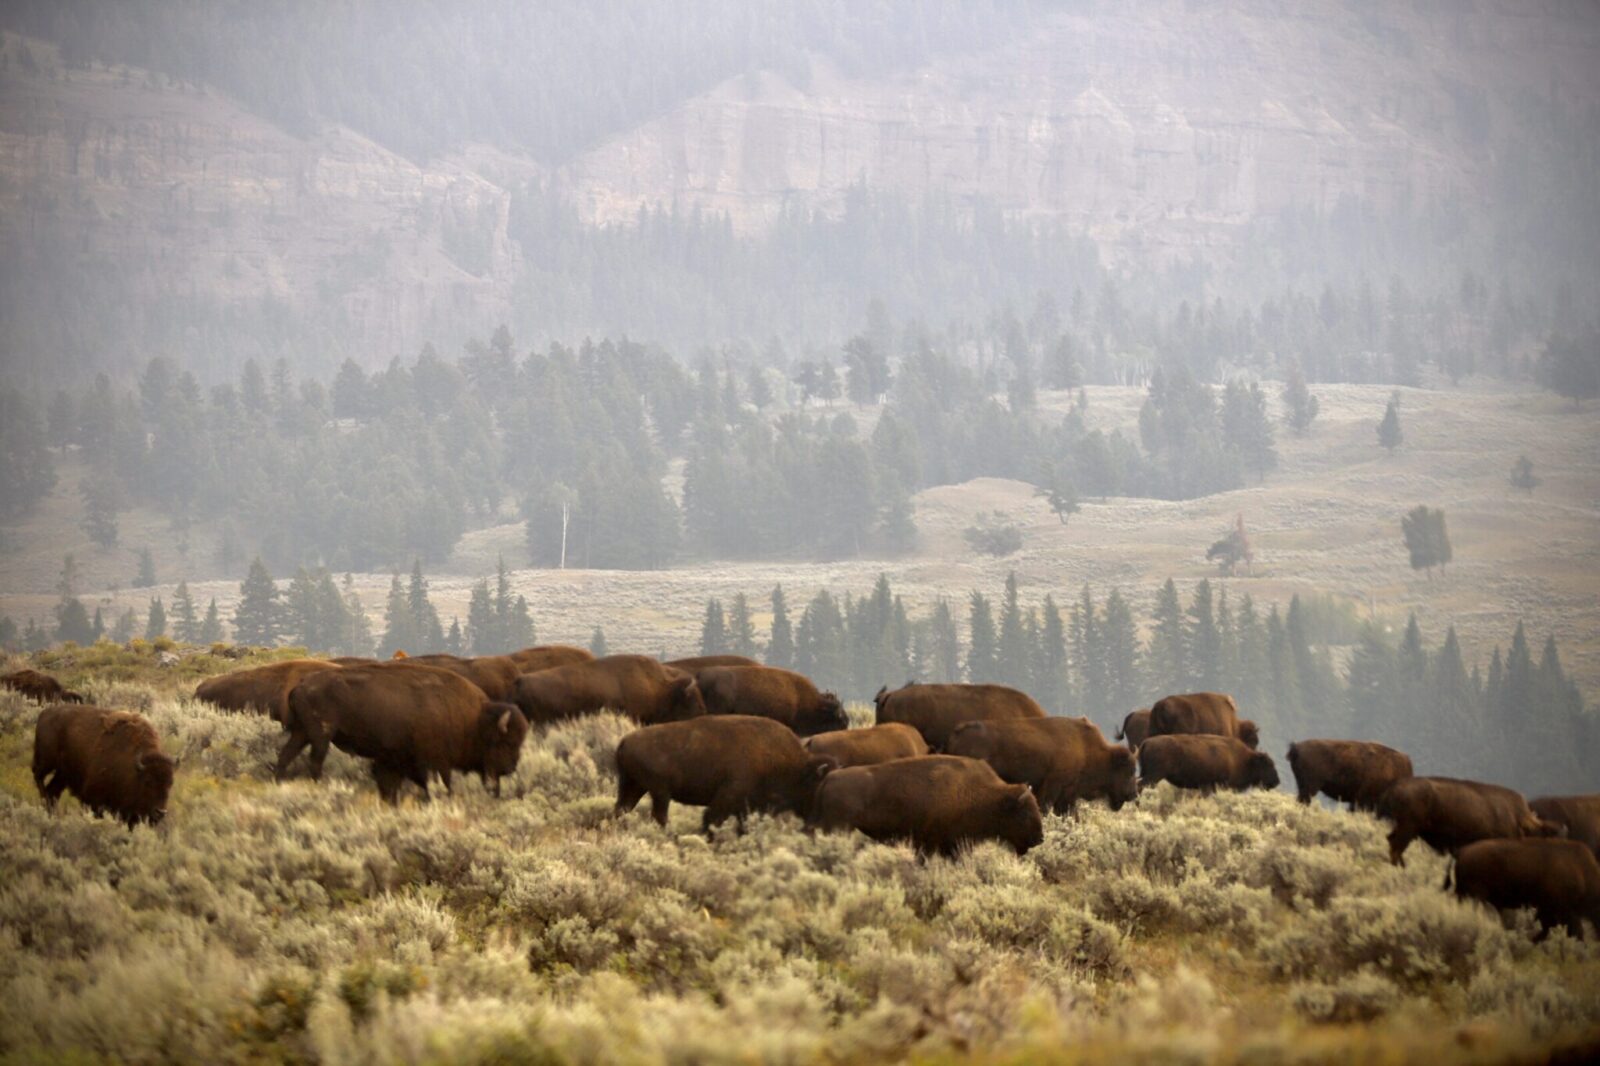 A herd of buffalo walks through the sagebrush with rolling pine forest behind.